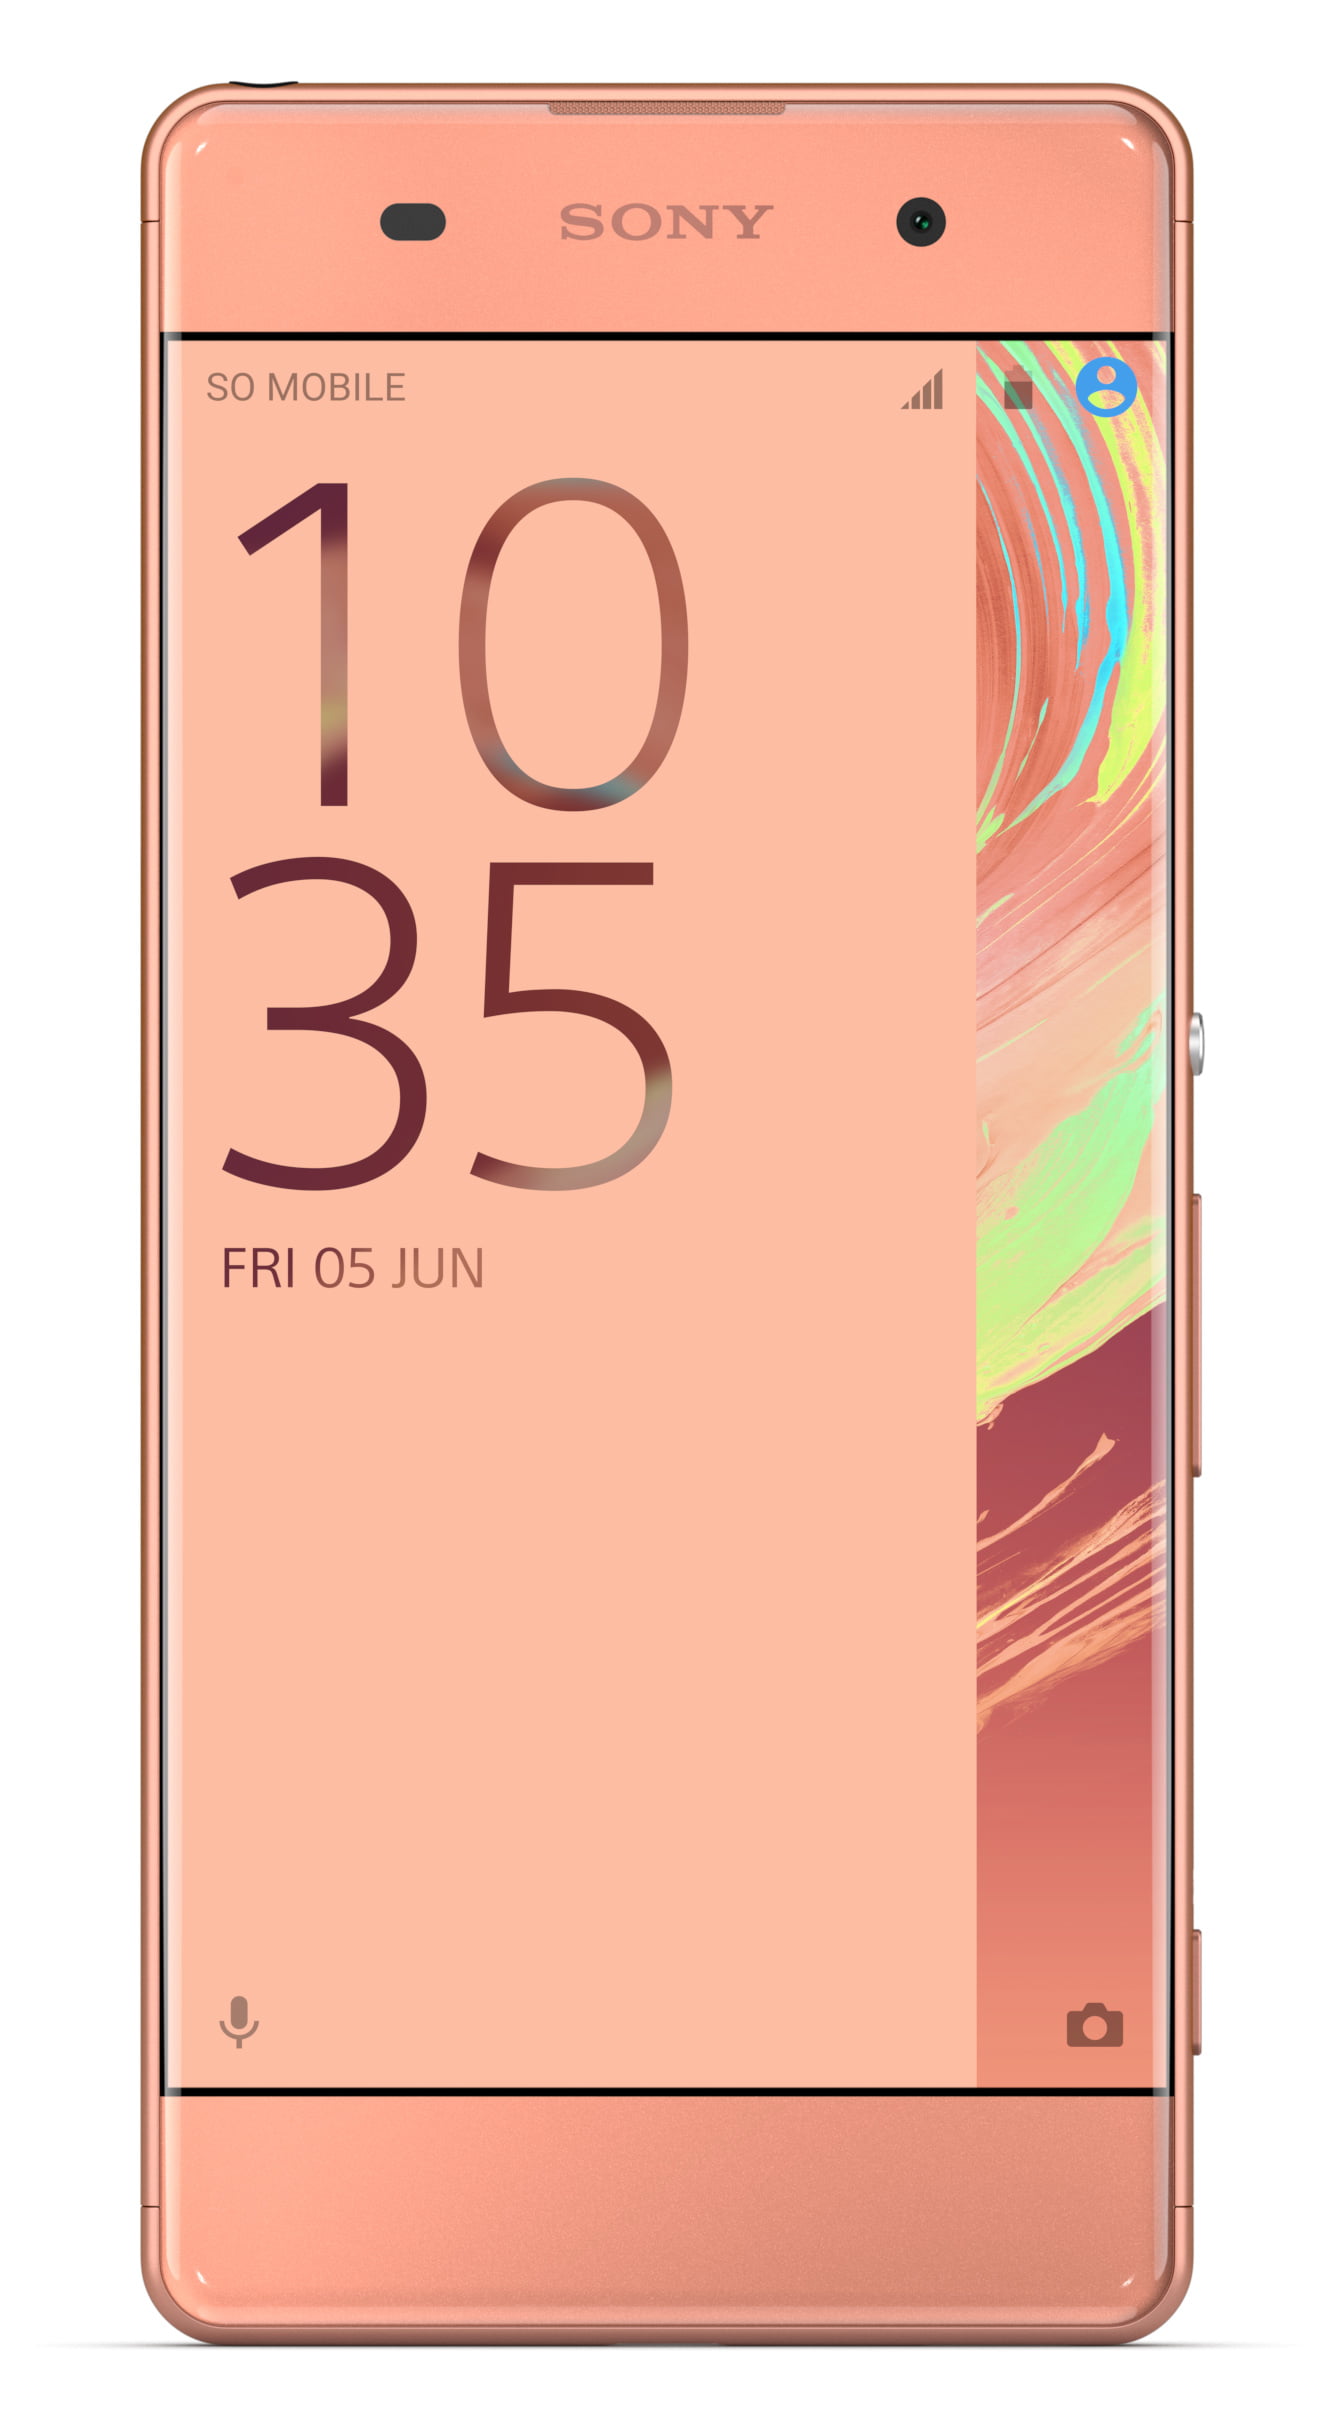 toediening ervaring hout Sony Xperia XA F3113 16GB GSM Android v6.0 Phone - Rose Gold - Walmart.com